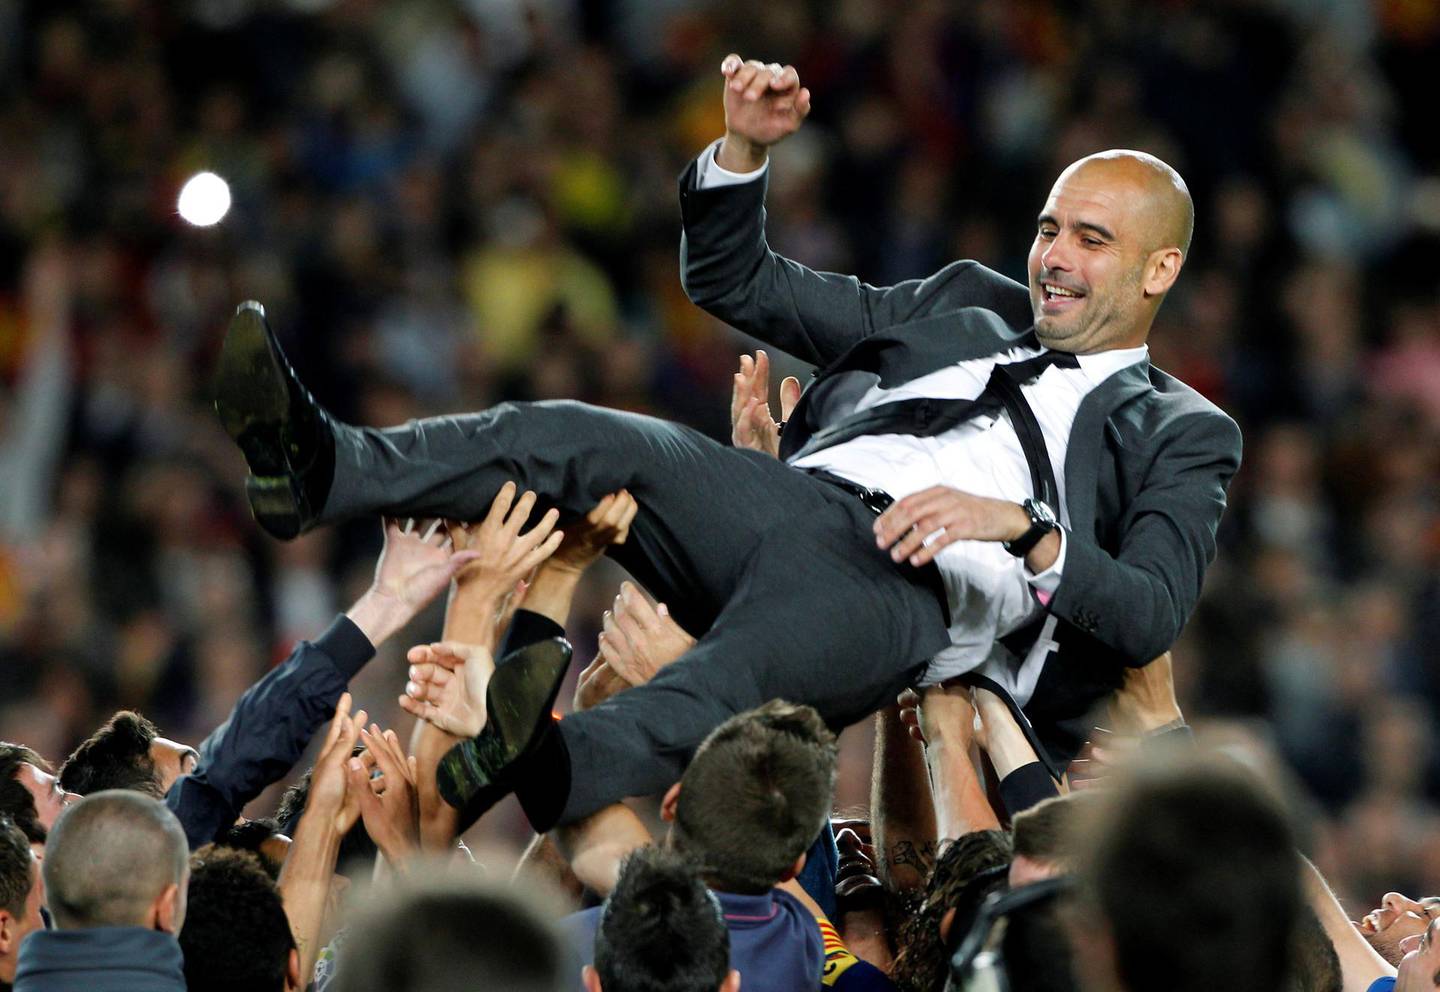 FILE PHOTO: ON THIS DAY -- May 5  May 5, 2012     SOCCER - Barcelona coach Pep Guardiola is tossed in the air by his players after his last game at the Camp Nou, a 4-0 victory over local rivals Espanyol in which striker Lionel Messi scored four times to take his tally for the season to 72 goals.     It was the perfect send-off for Guardiola, who won three La Liga titles, the Spanish Cup twice and Champions League twice in his four seasons managing the senior team.     "Life has given me this gift during the past five years of being able to live with these players and enjoy this spectacle," Guardiola told fans. "I have been the privileged one, to feel so loved and admired during all these years." REUTERS/Albert Gea/File photo